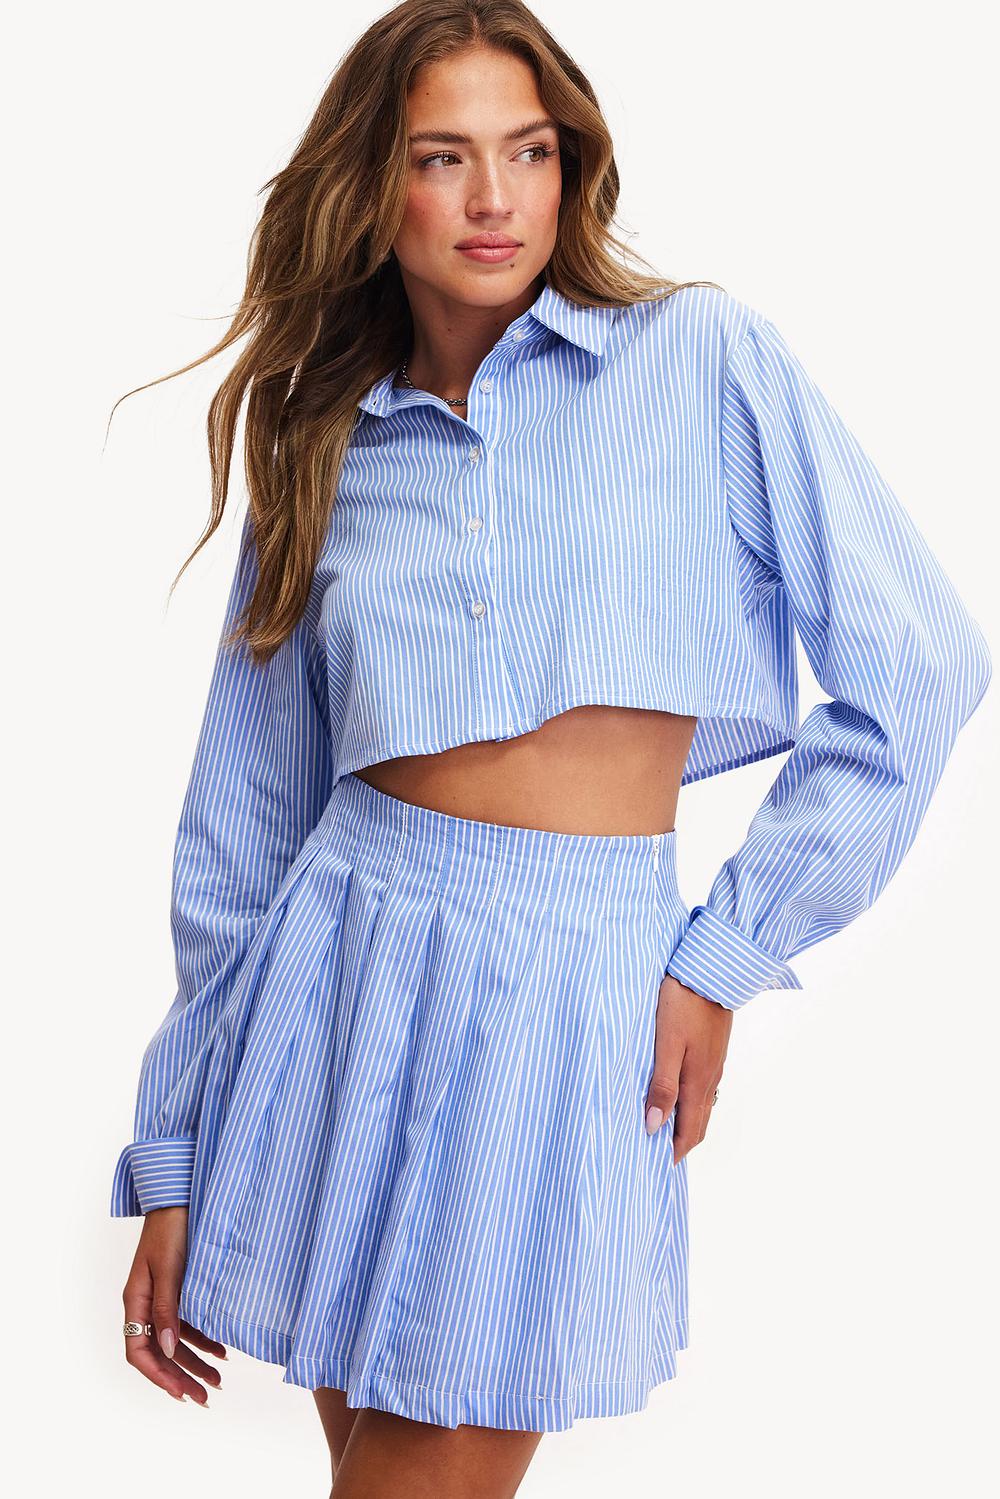 Blue blouse with stripes